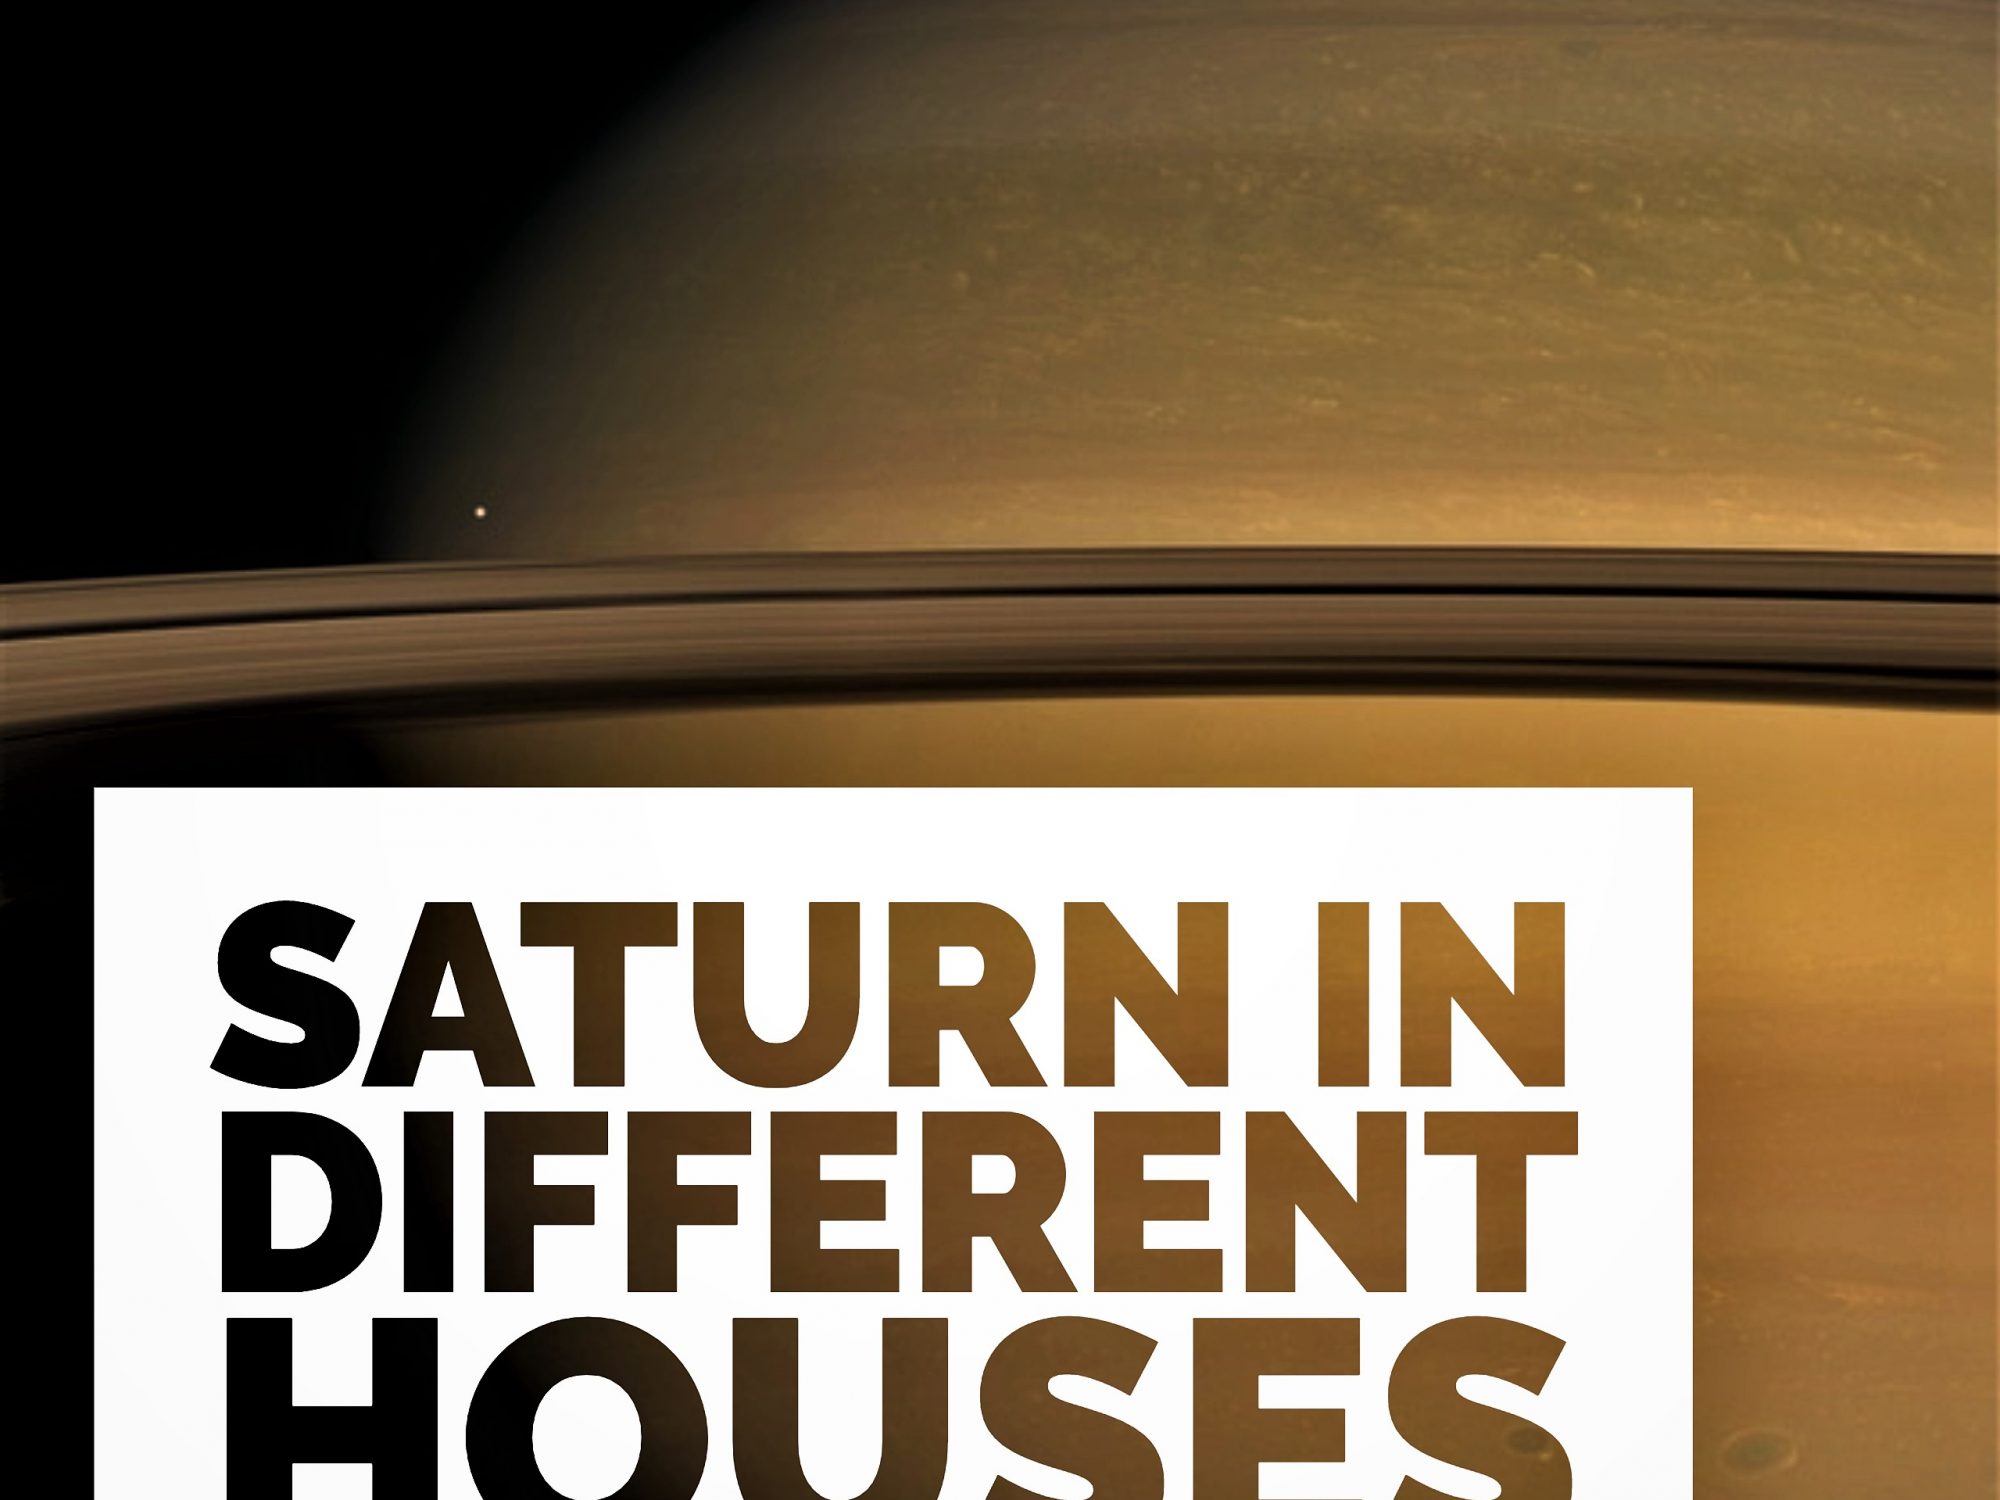 Saturn in Different Houses